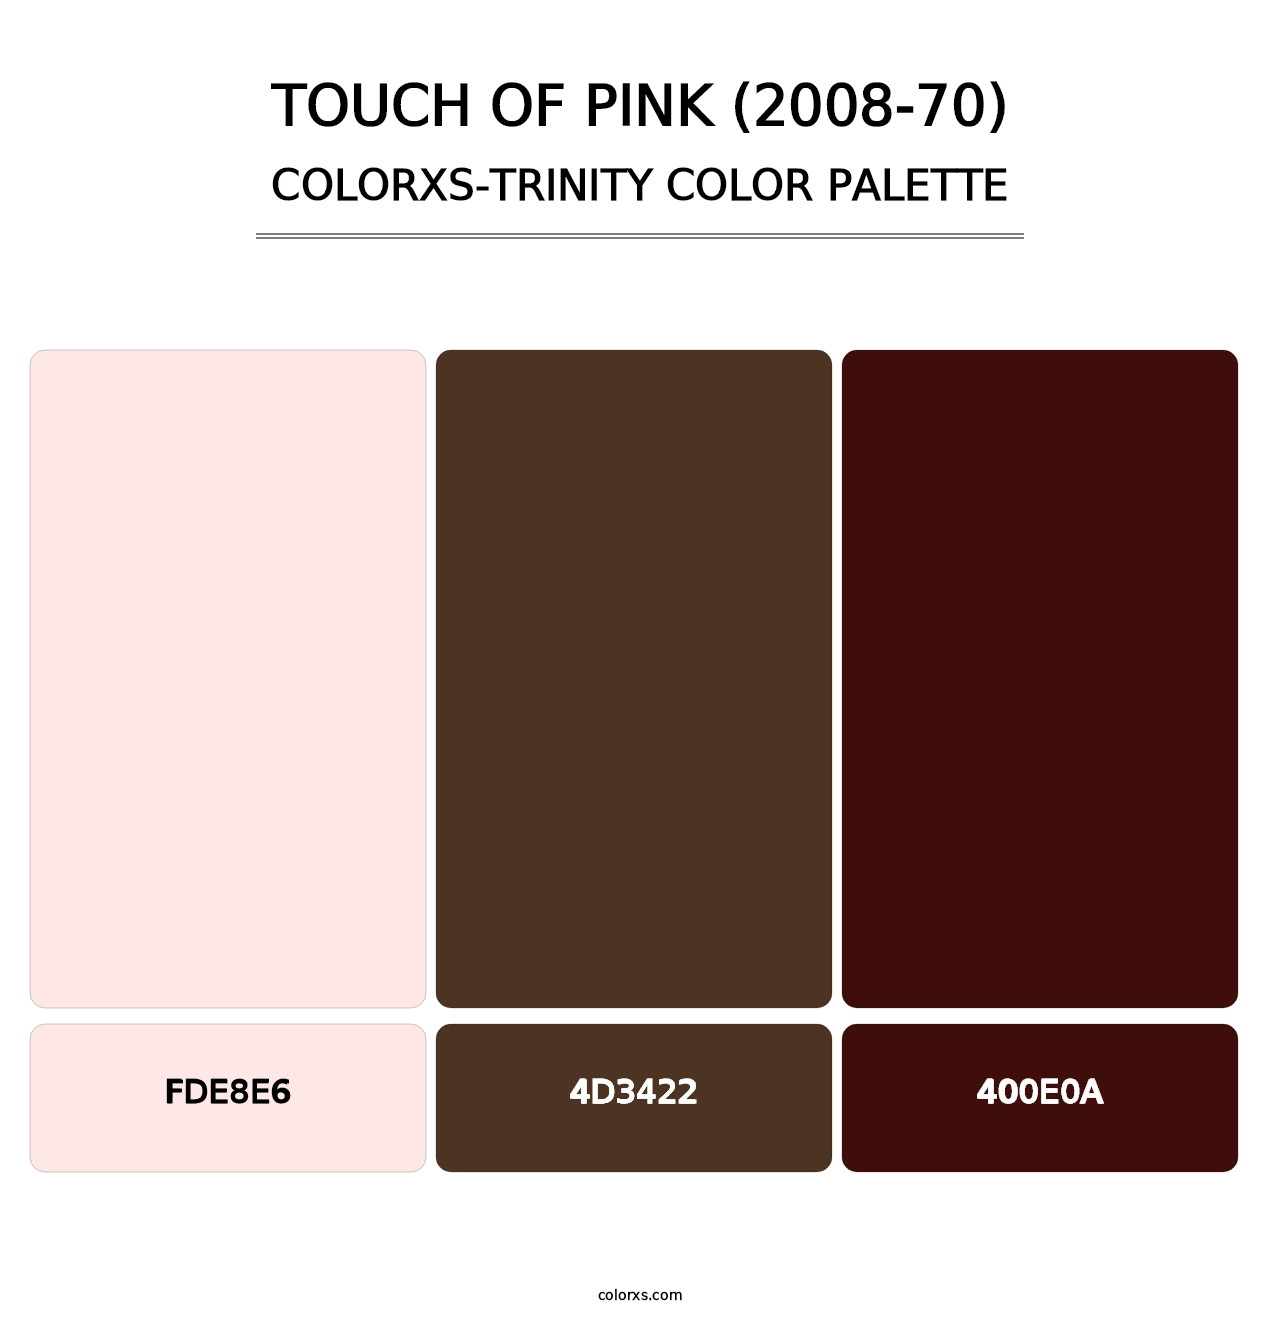 Touch of Pink (2008-70) - Colorxs Trinity Palette